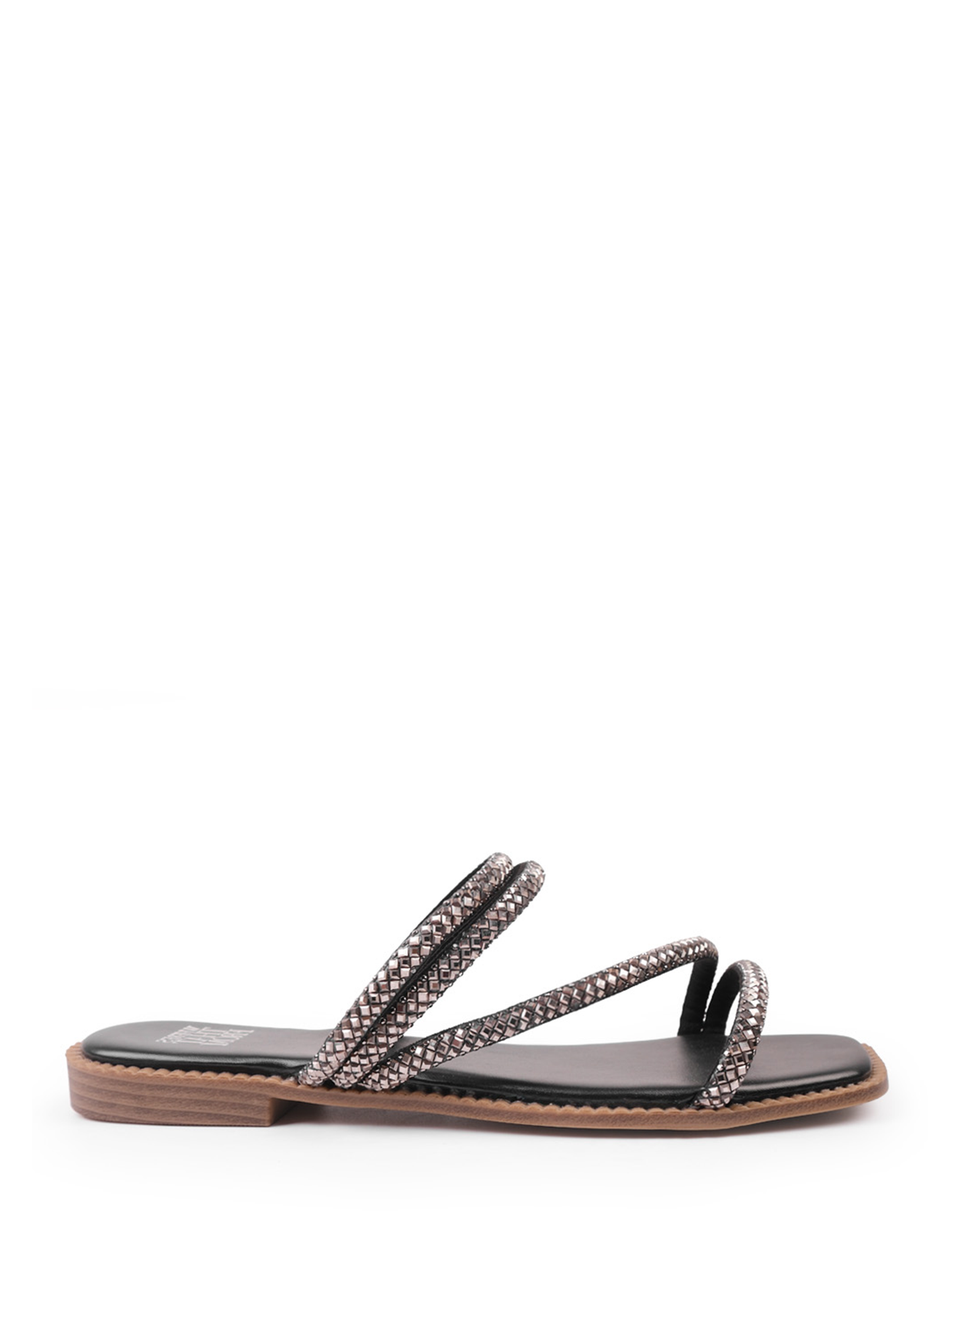 Where's That From Black Pu Dream Strappy Flat Sandals